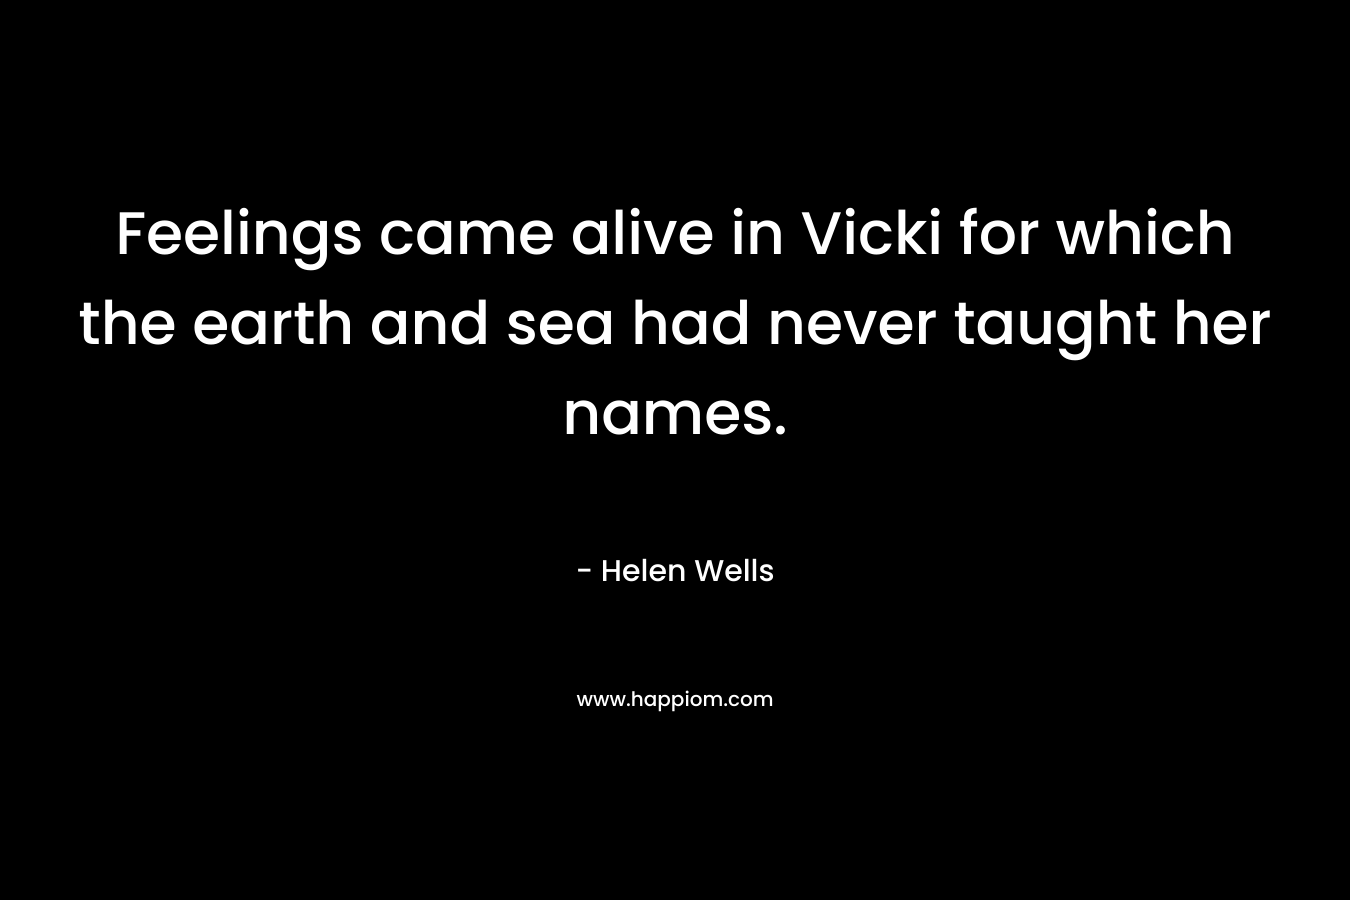 Feelings came alive in Vicki for which the earth and sea had never taught her names. – Helen Wells